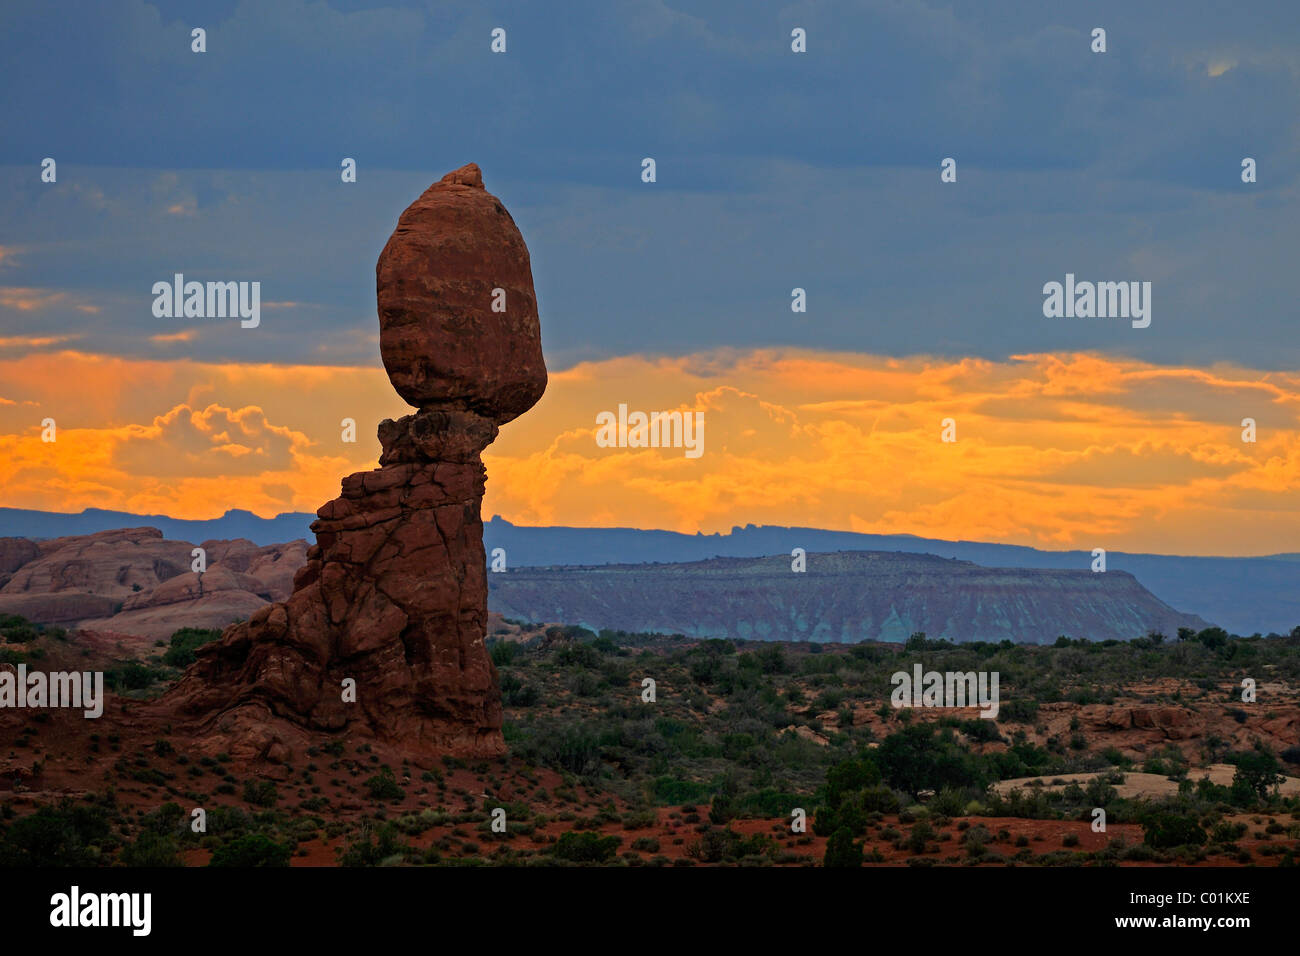 Balanced Rock at sunset with an oncoming thunderstorm, Arches National Park, Utah, Southwest, USA Stock Photo